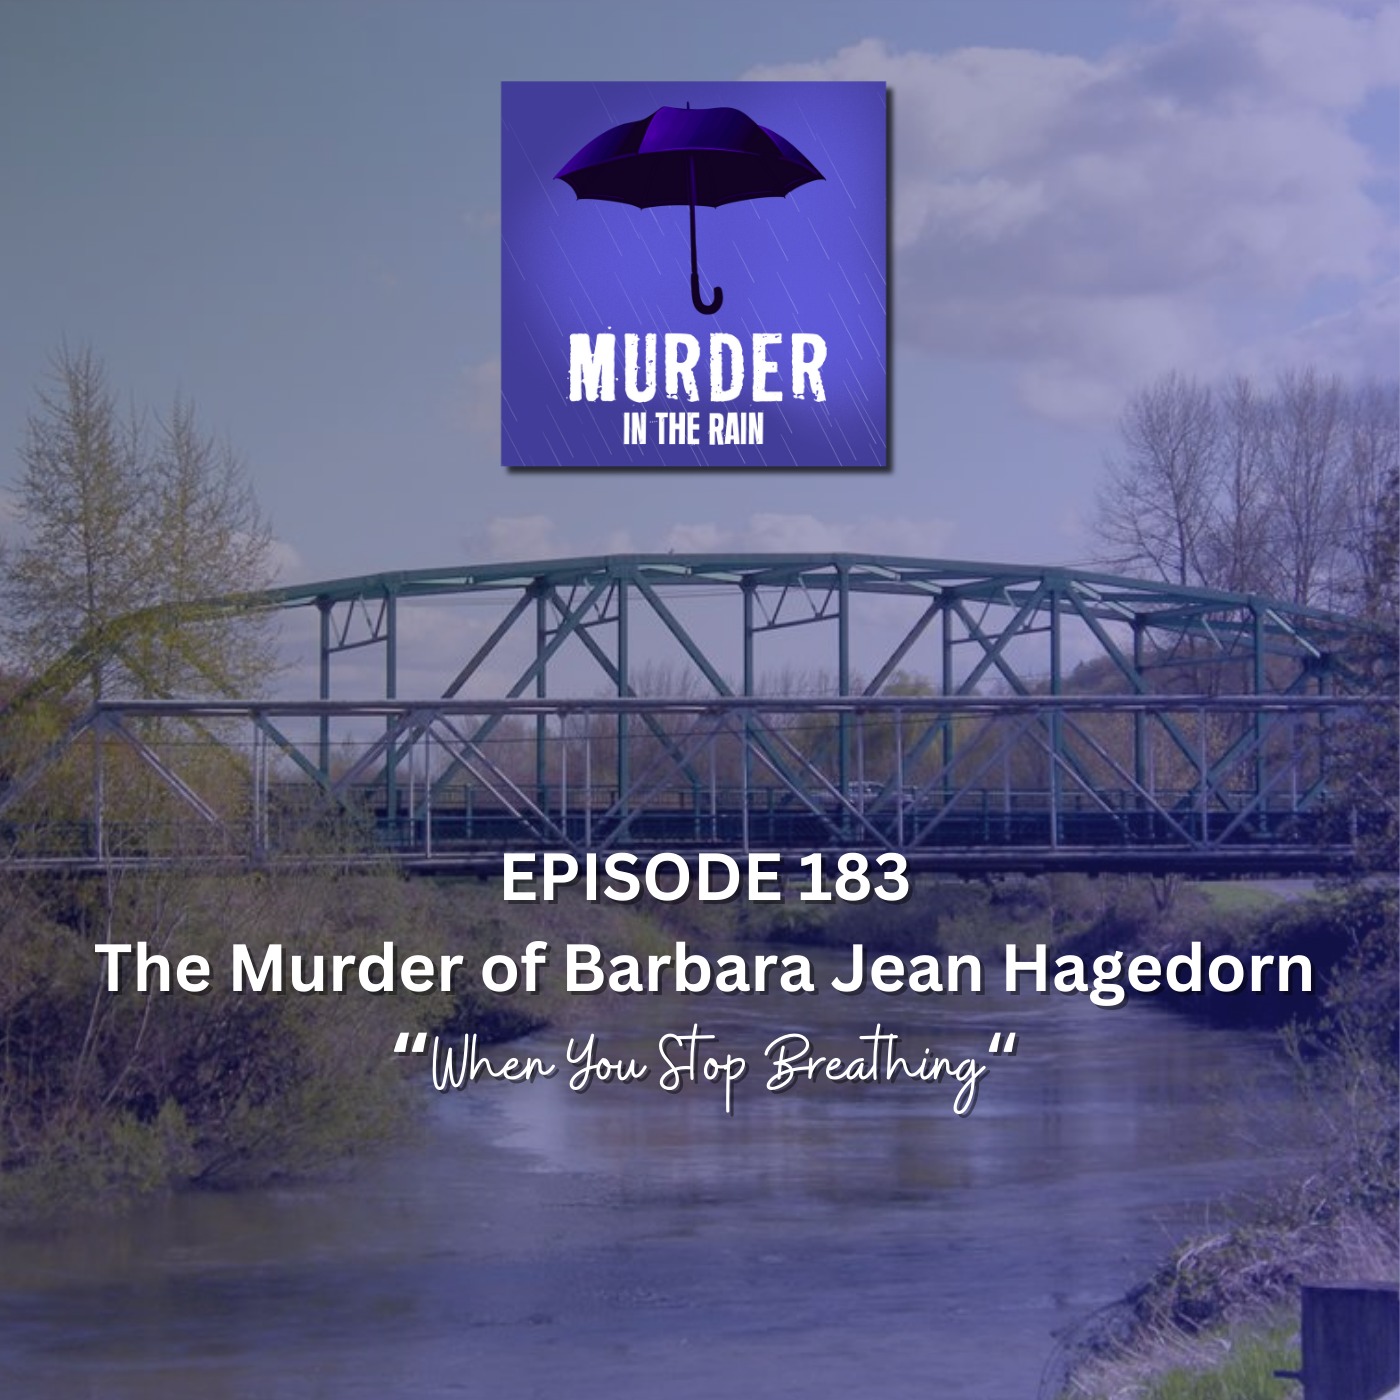 The Murder of Barbara Jean Hagedorn Part 1: When You Stop Breathing